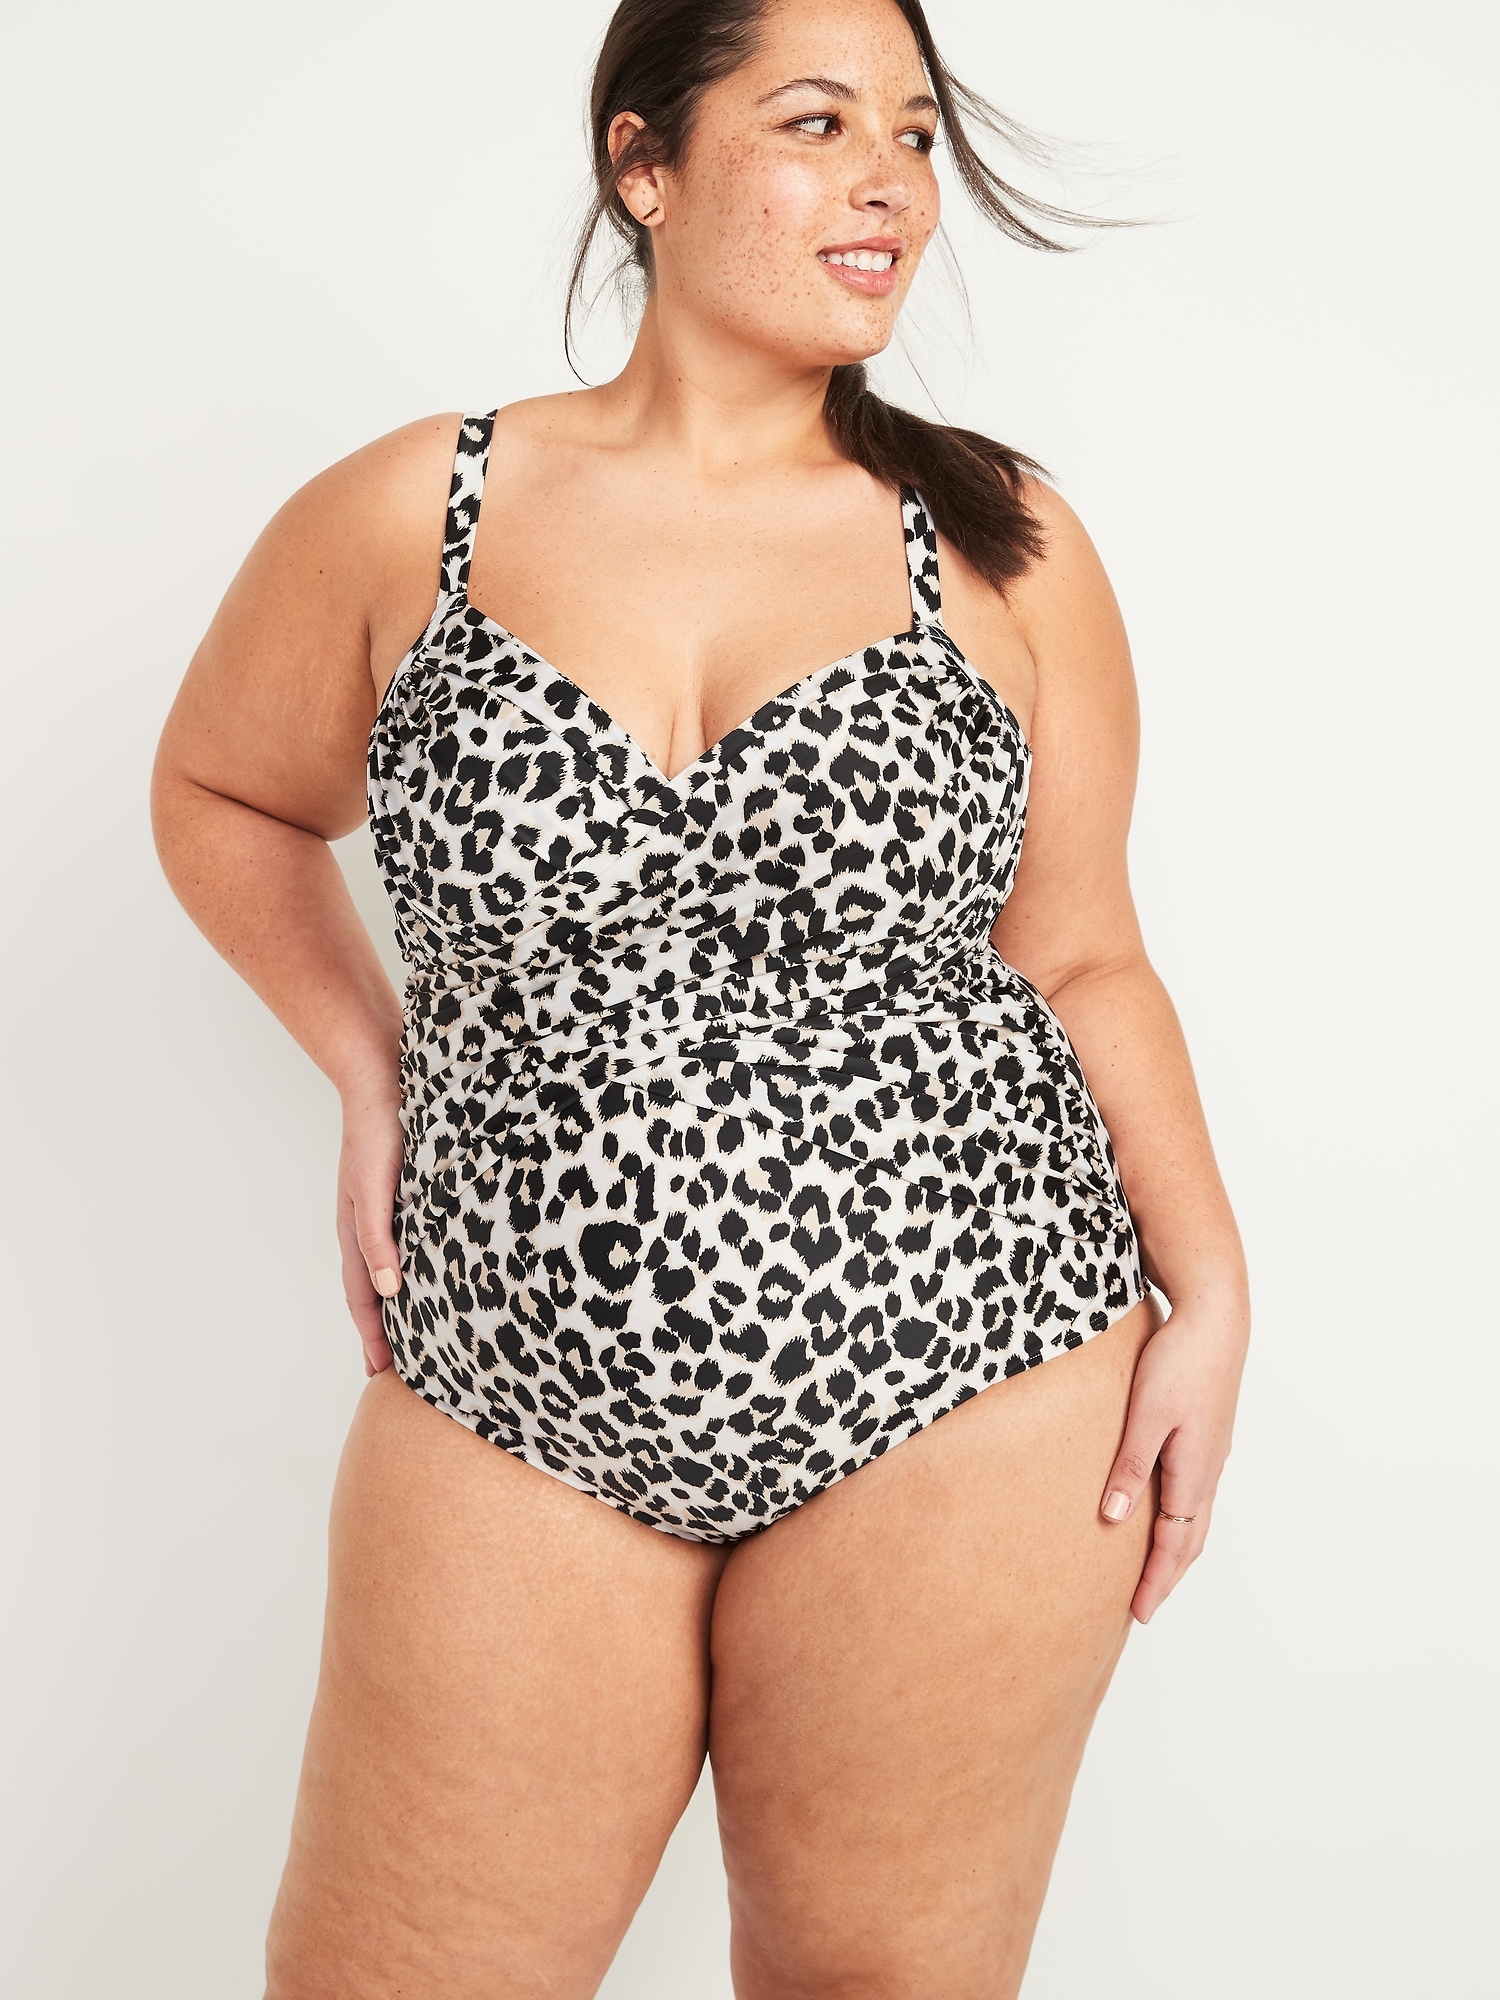 plus size swimsuits with underwire support